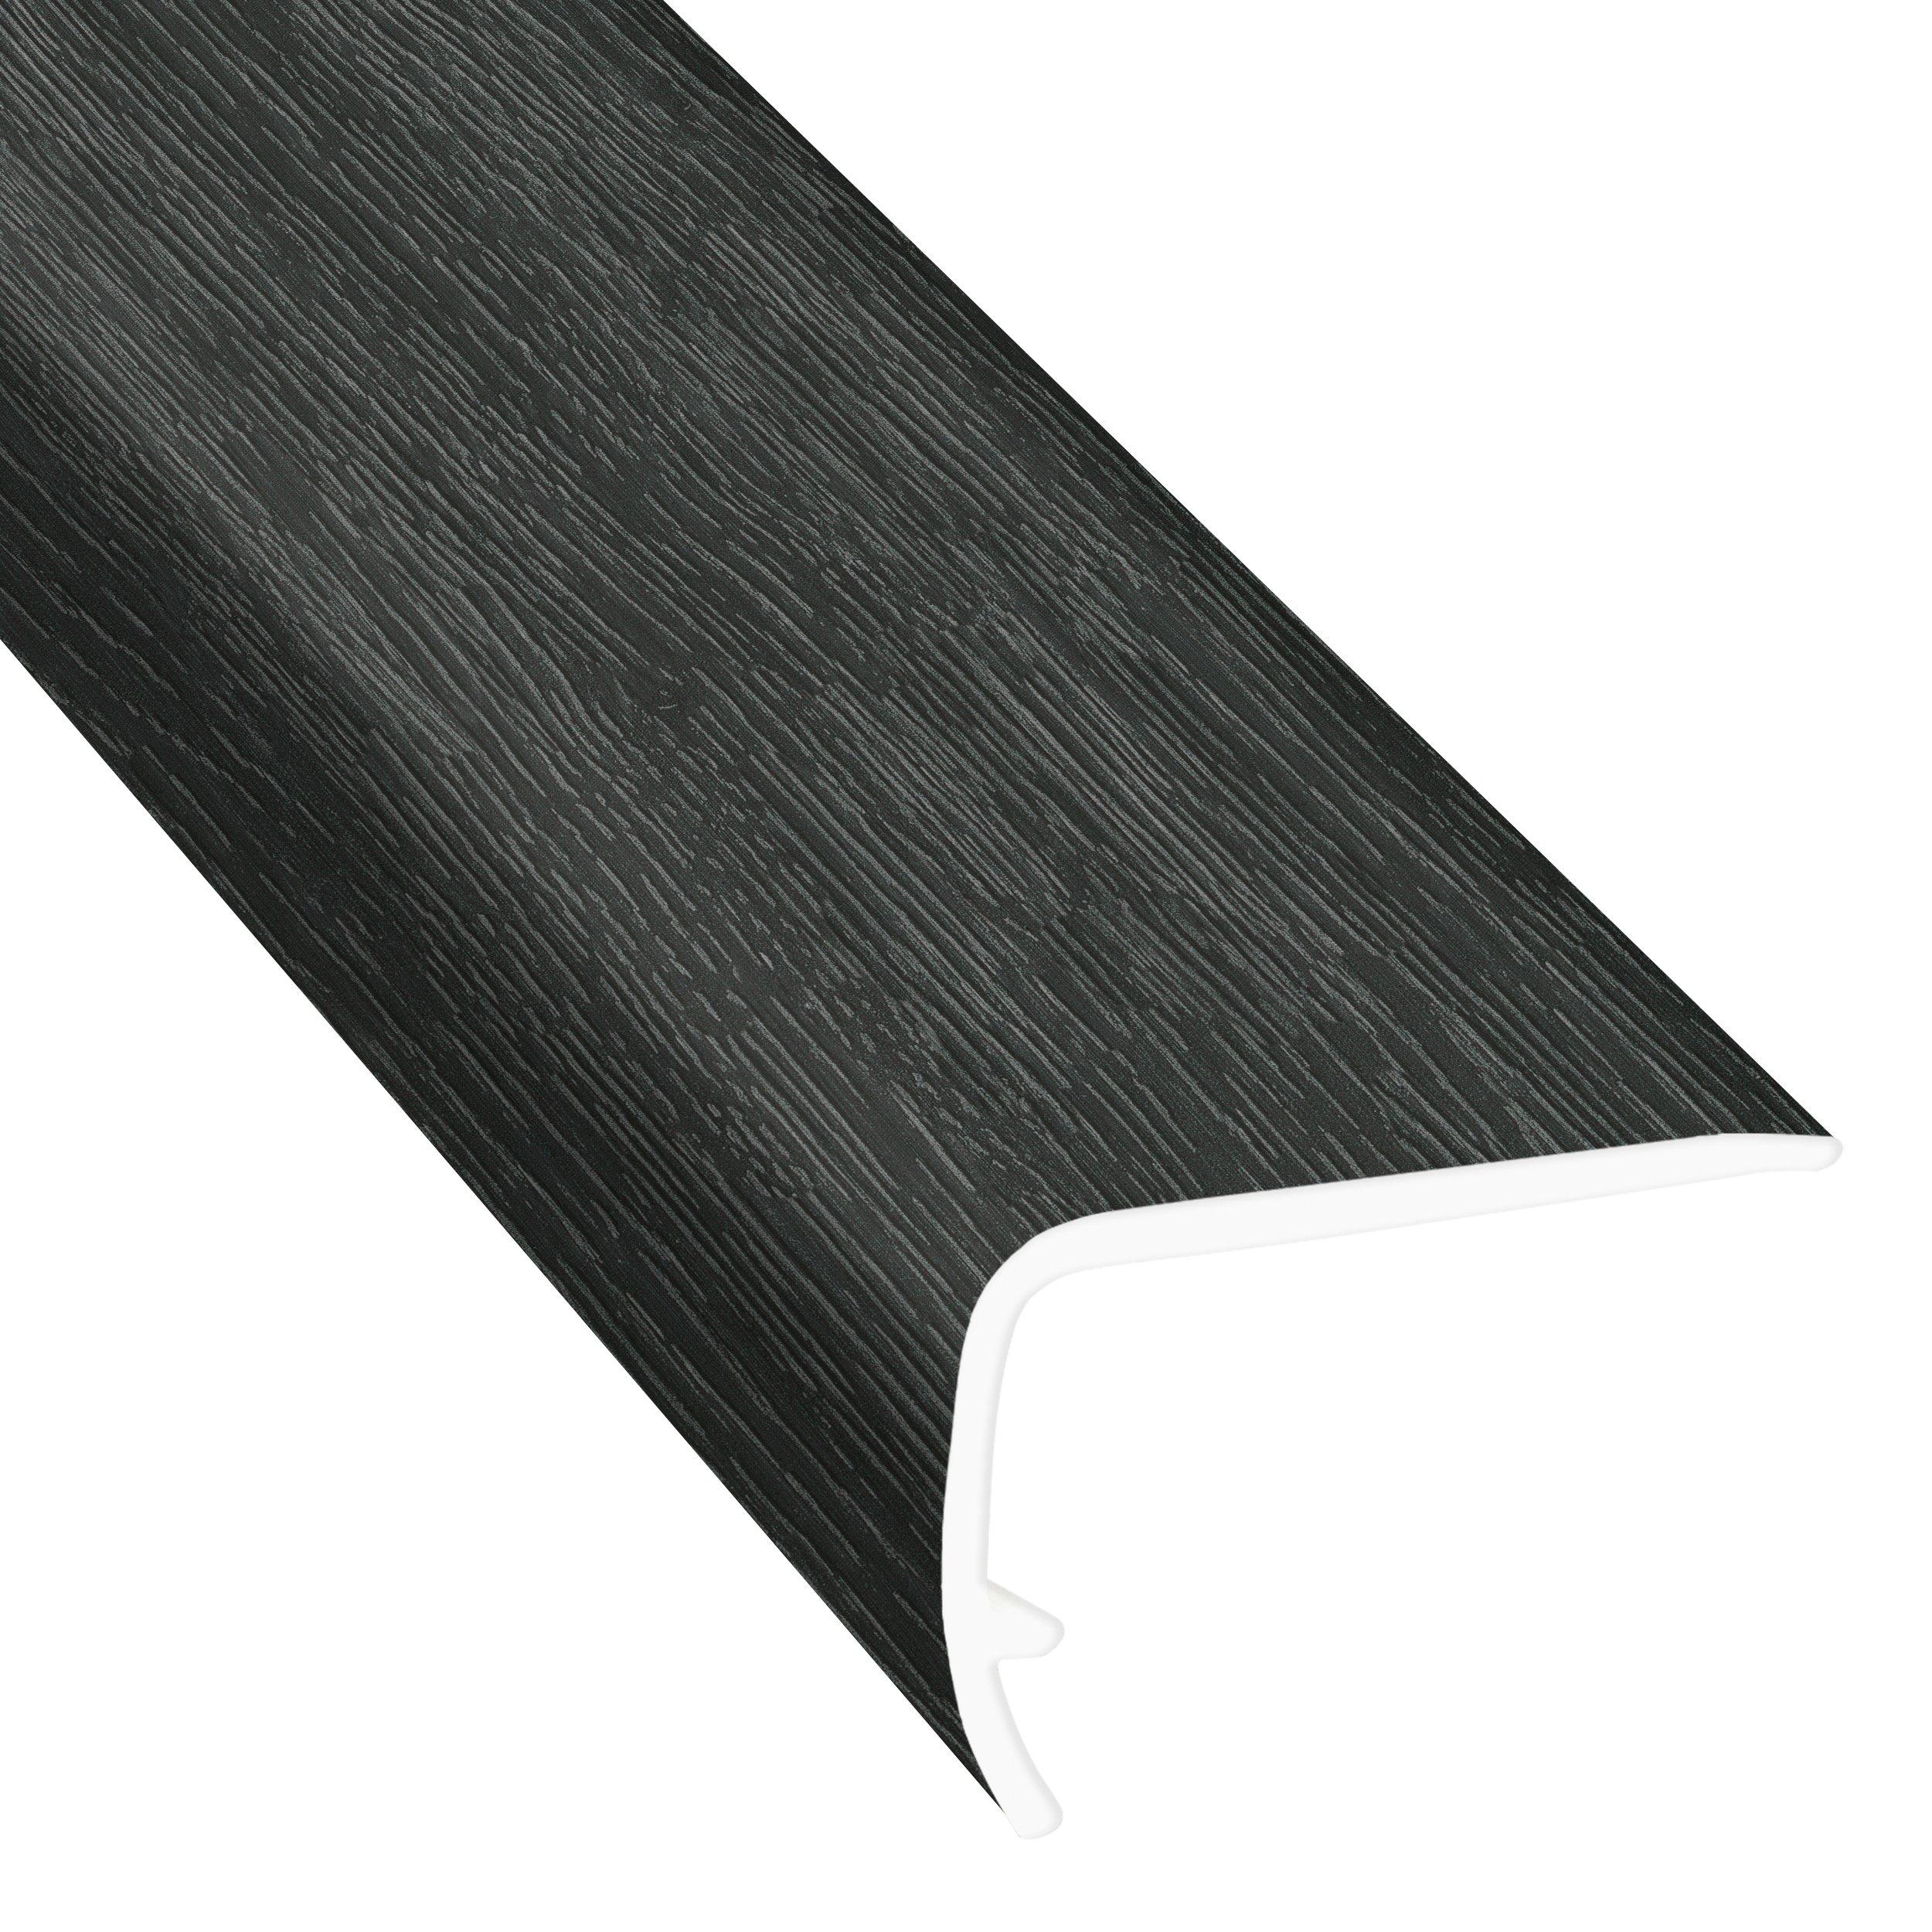 Ebony Grove Ash 94in. Vinyl Overlapping Stair Nose